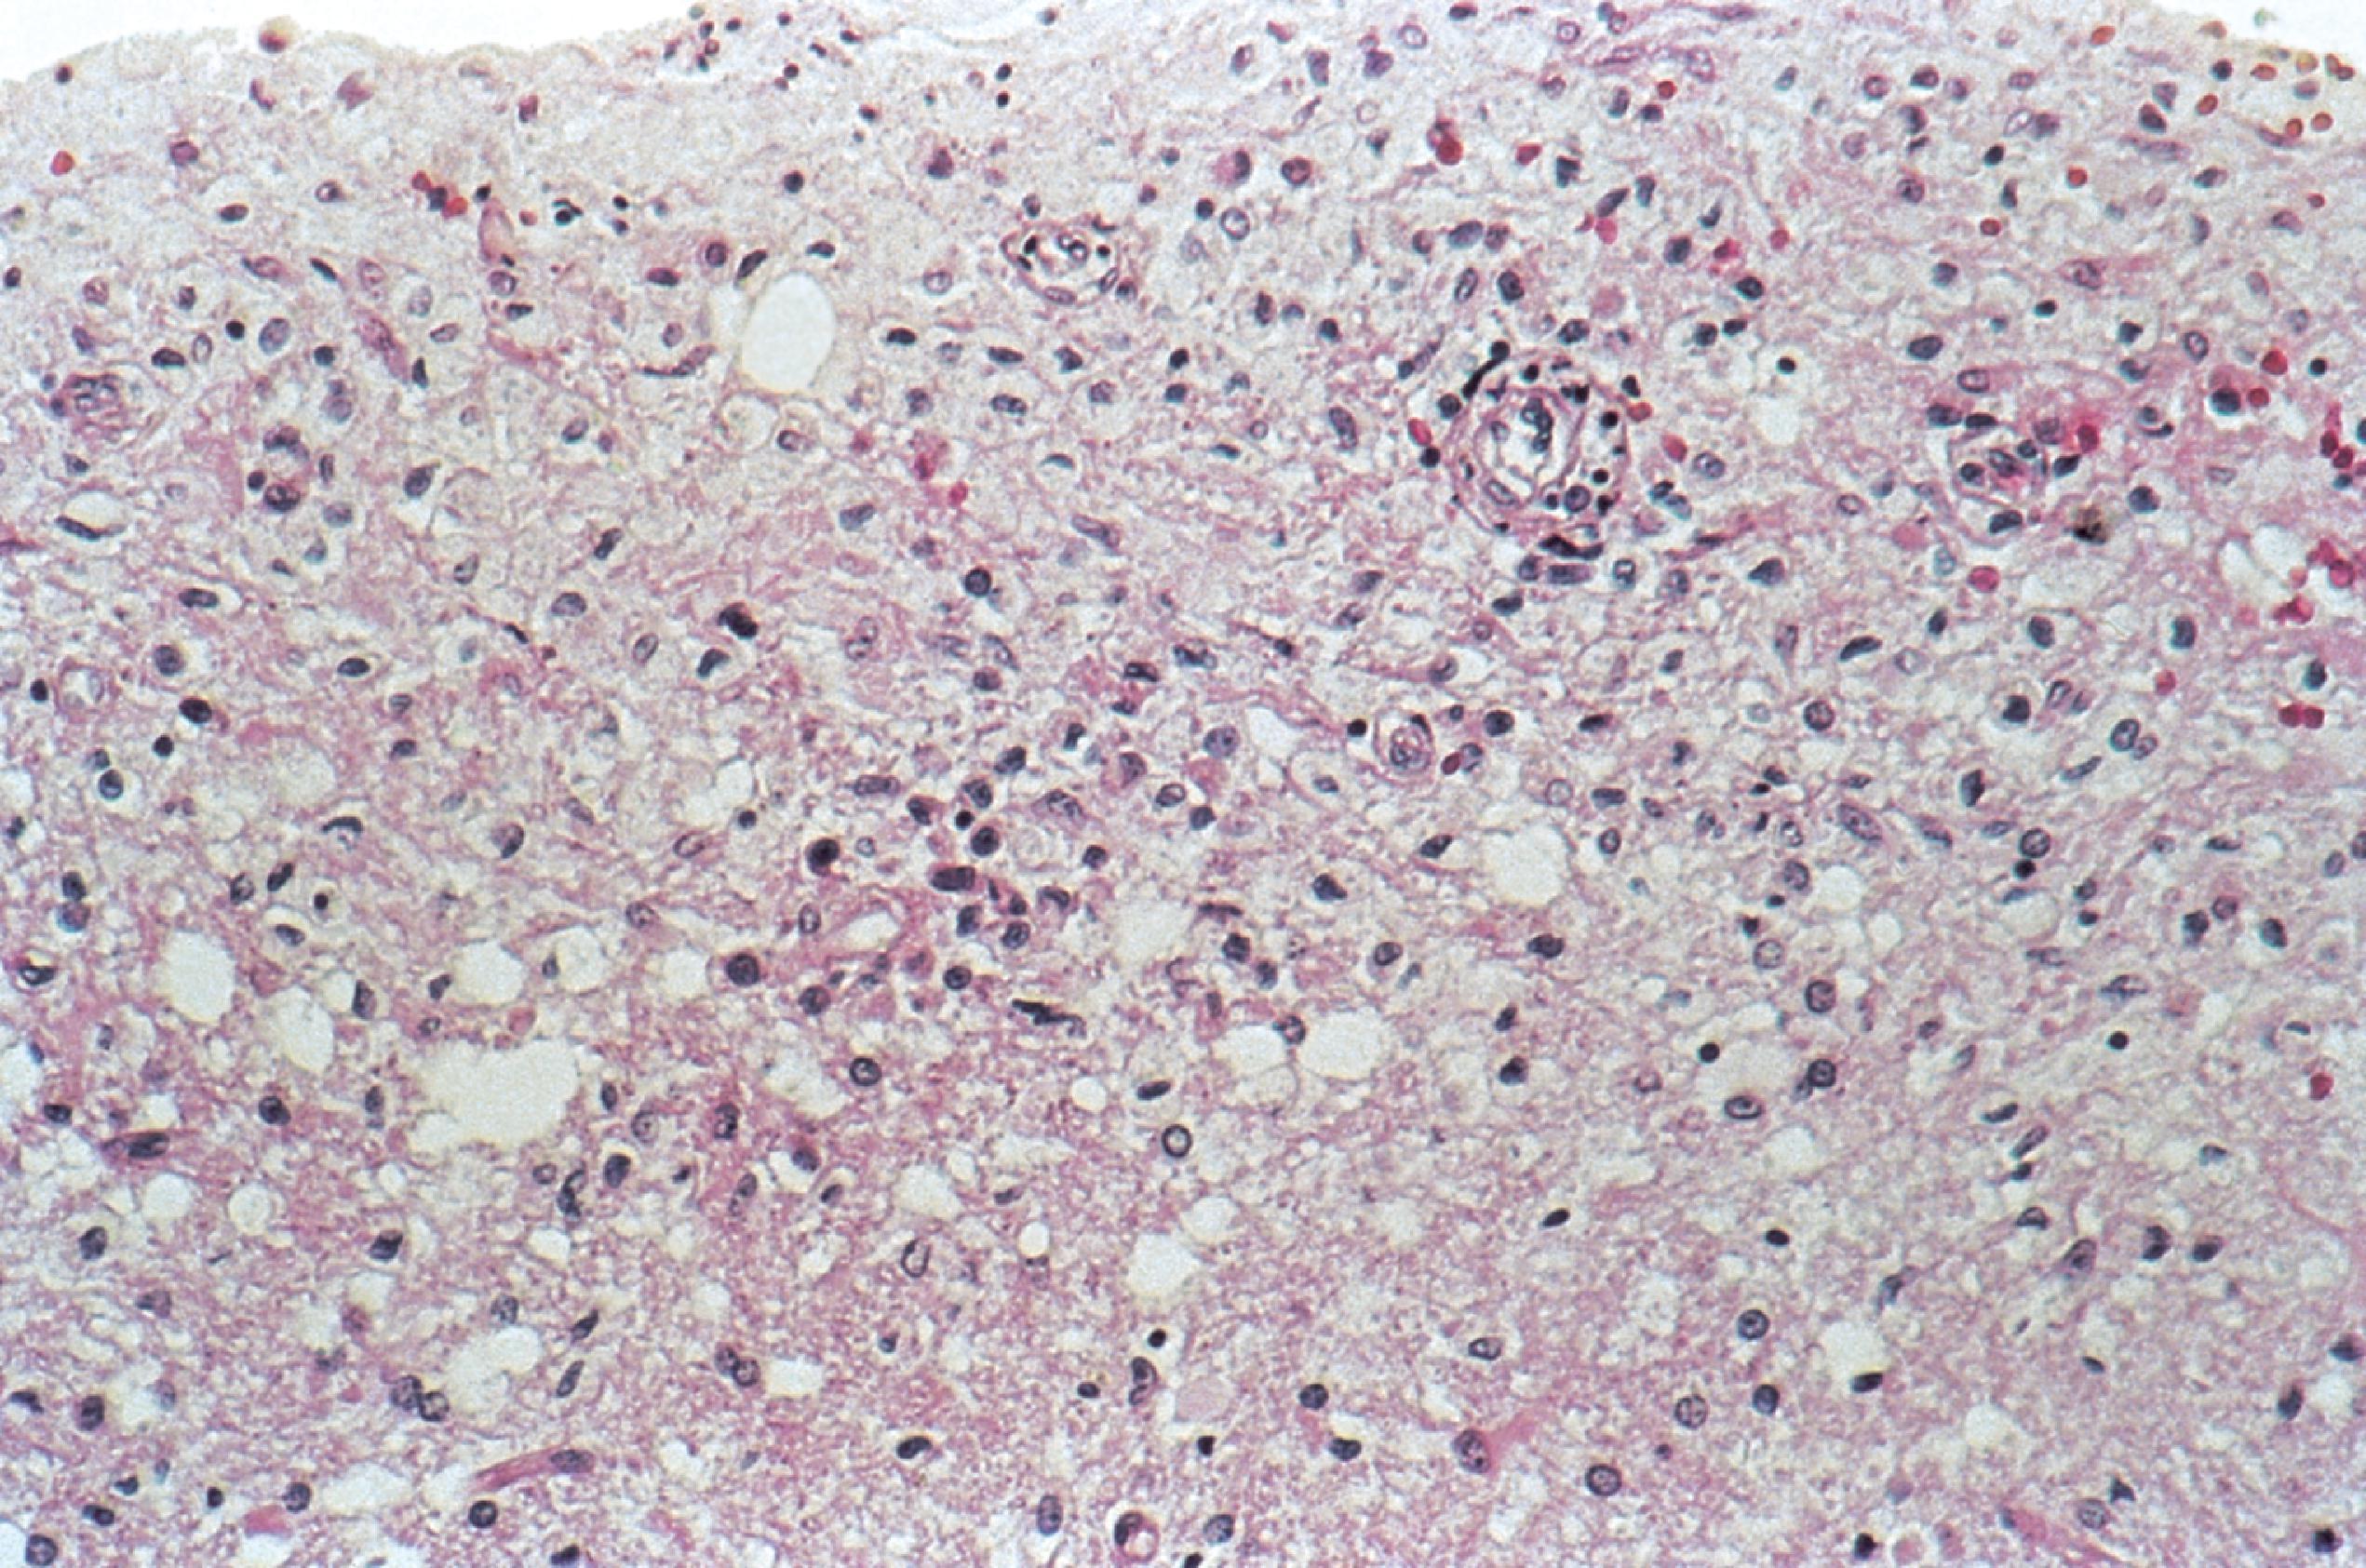 FIGURE 7.13, Whipple disease. Microscopic findings in Whipple disease consist of an inflammatory infiltrate that is composed predominantly of macrophages and associated with reactive astrocytosis.